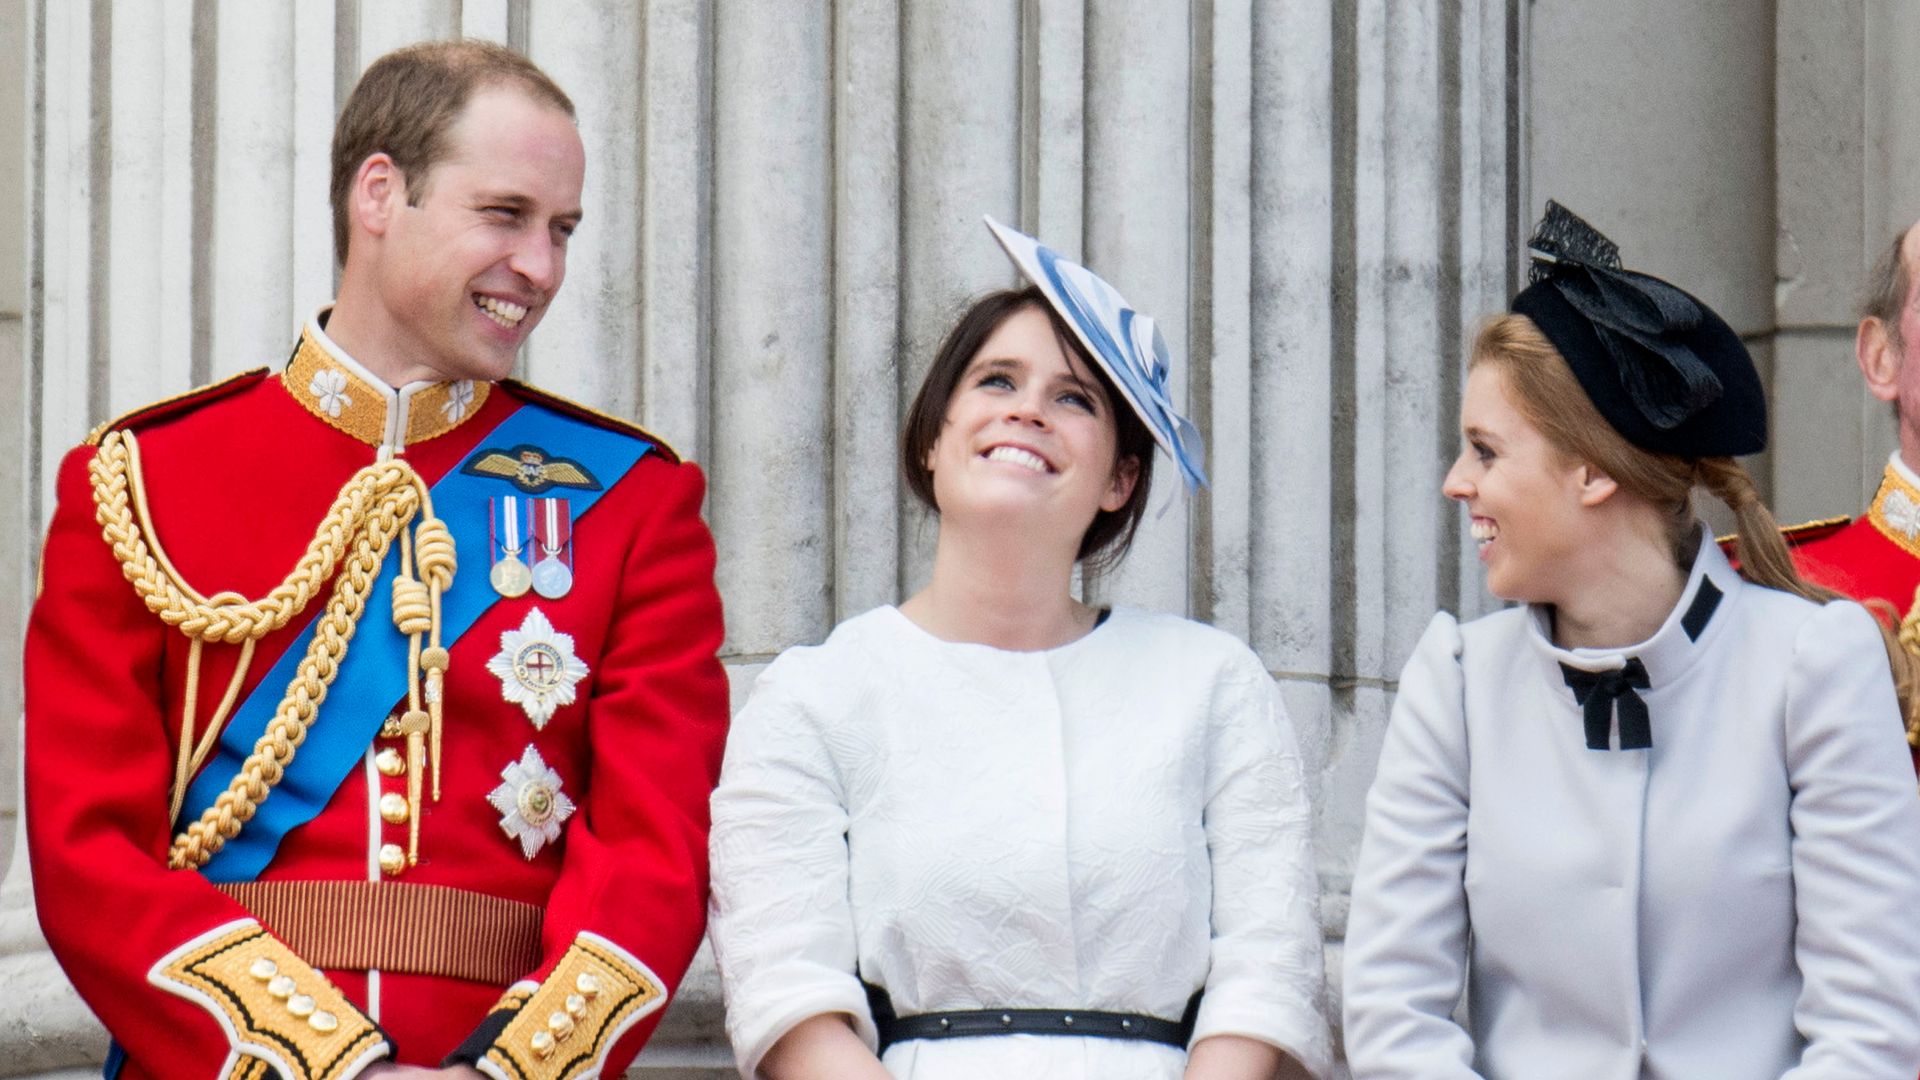 William laughing with Beatrice and Eugenie